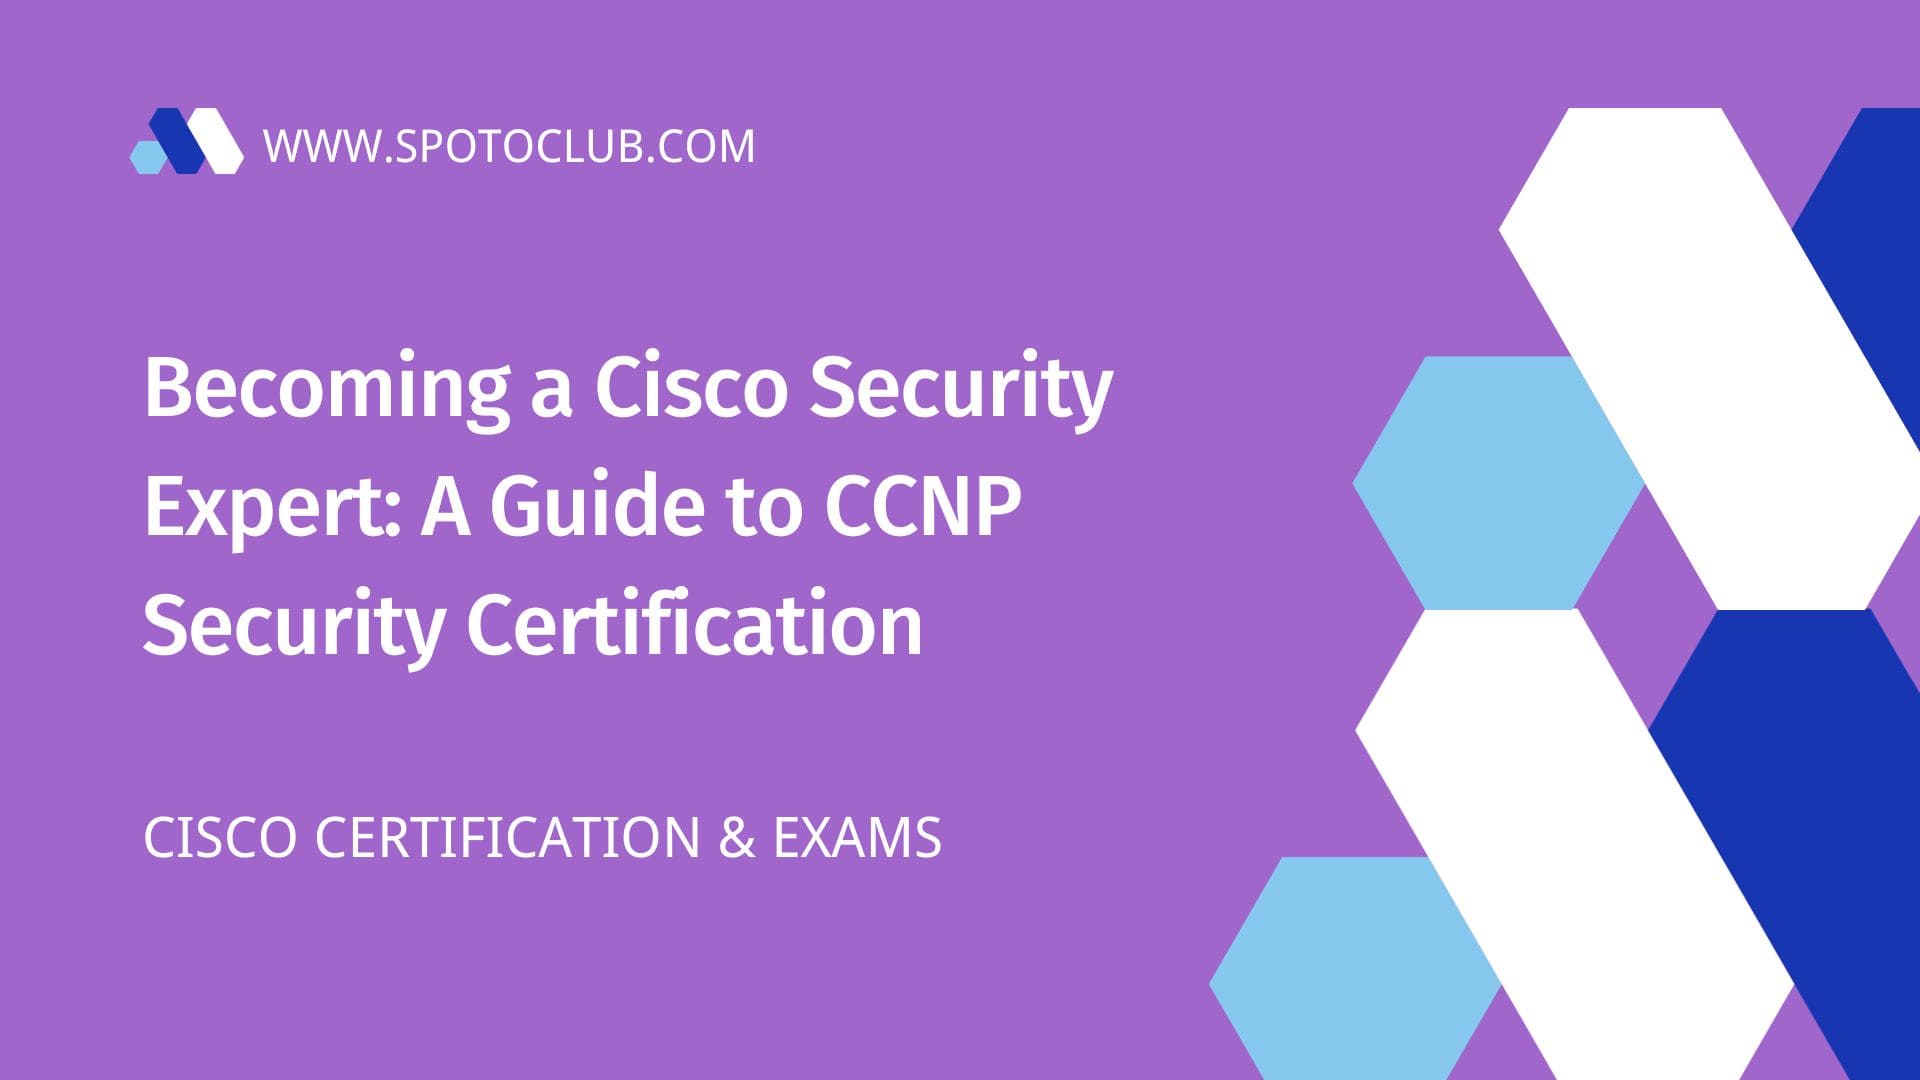 A Guide to CCNP Security Certification